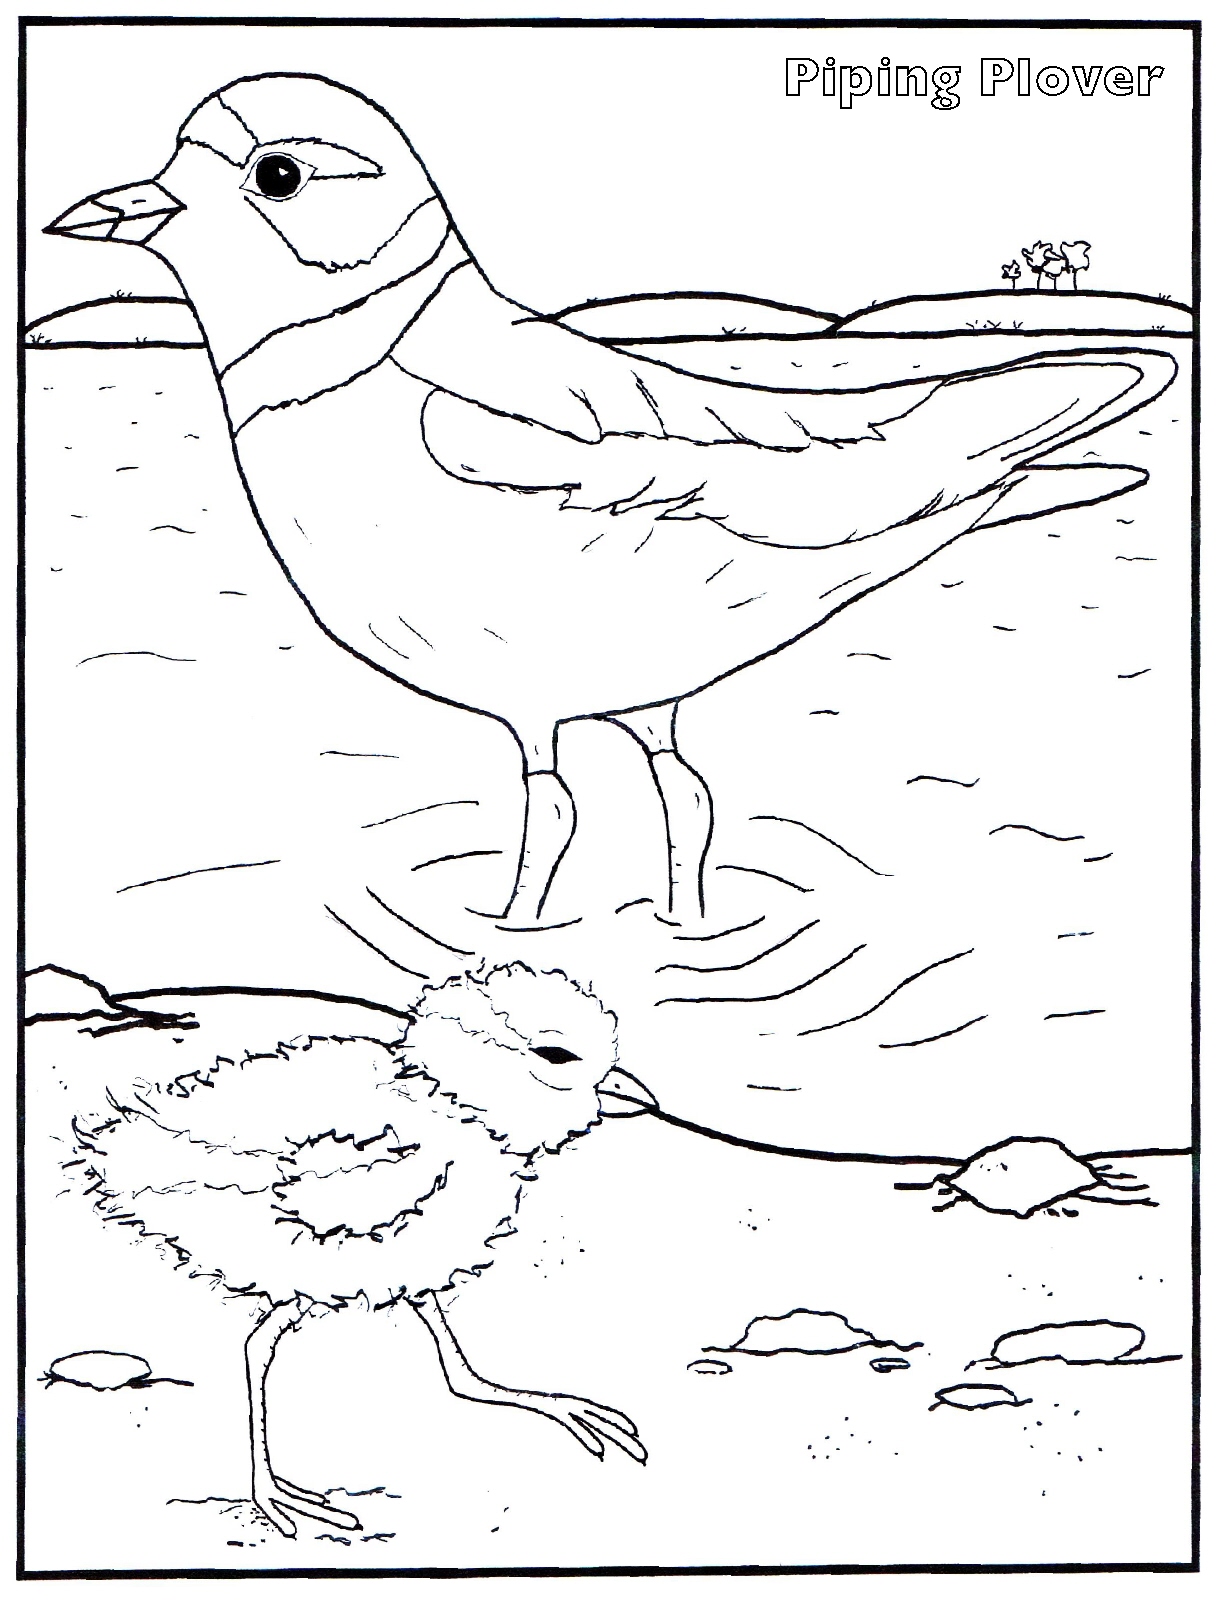 Plover coloring #7, Download drawings